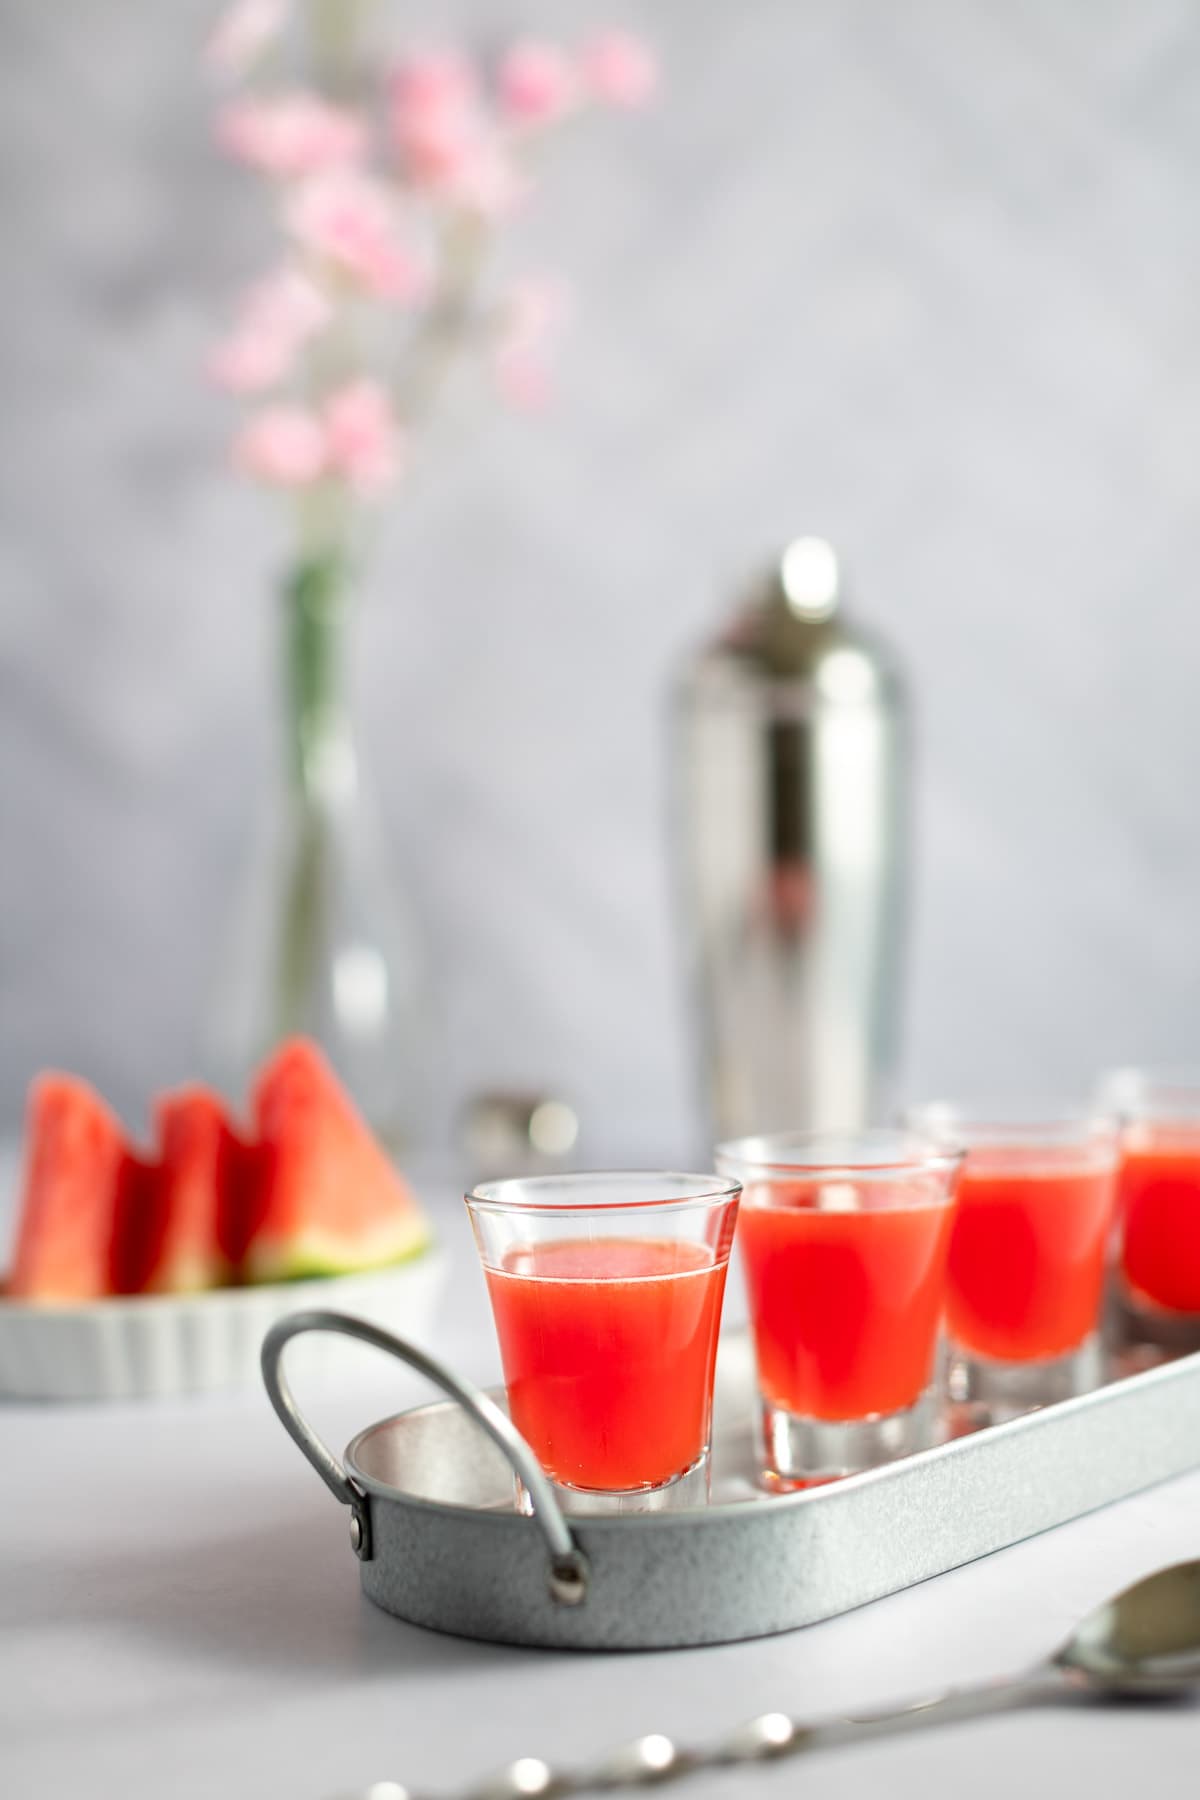 Four watermelon shooters on a metal serving tray, with sliced watermelon, a metal cocktail shaker and a vase of flowers in the background.